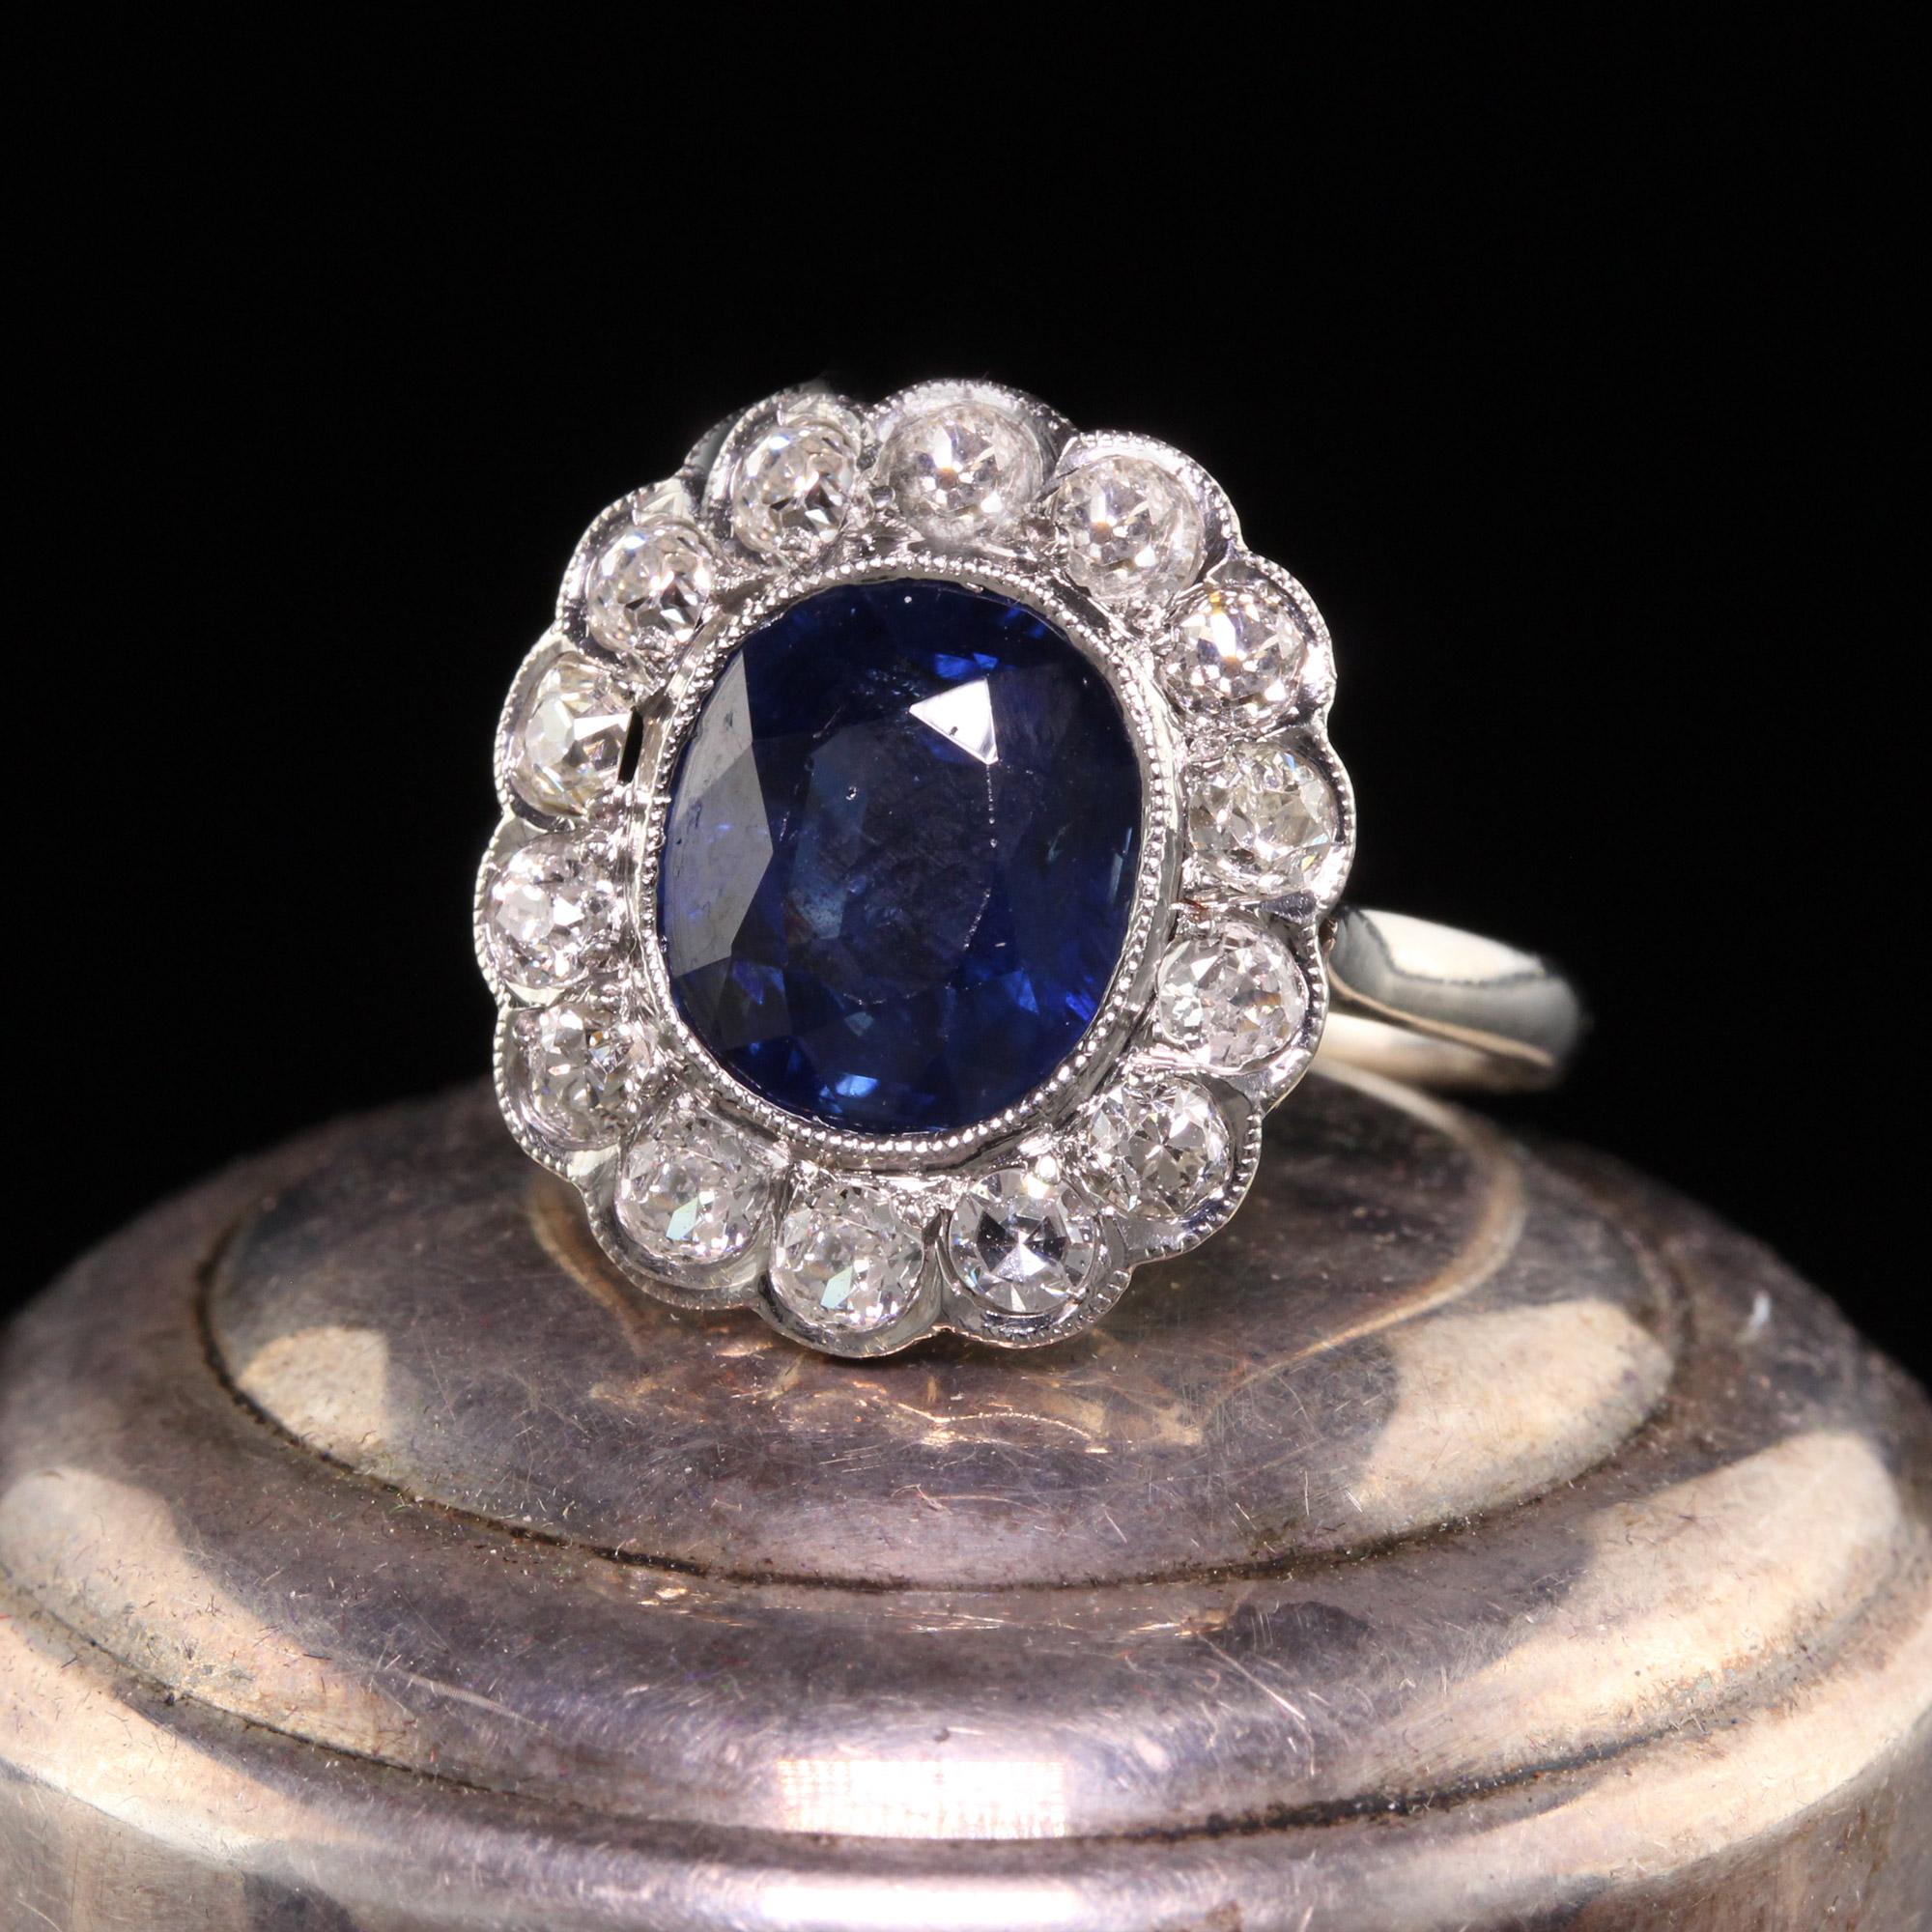 Beautiful Antique Art Deco Platinum Natural No Heat Sapphire Diamond Engagement Ring. This gorgeous engagement ring is crafted in platinum. The center holds a beautiful blue sapphire that shows no indication of heating. It is surrounded by old cut